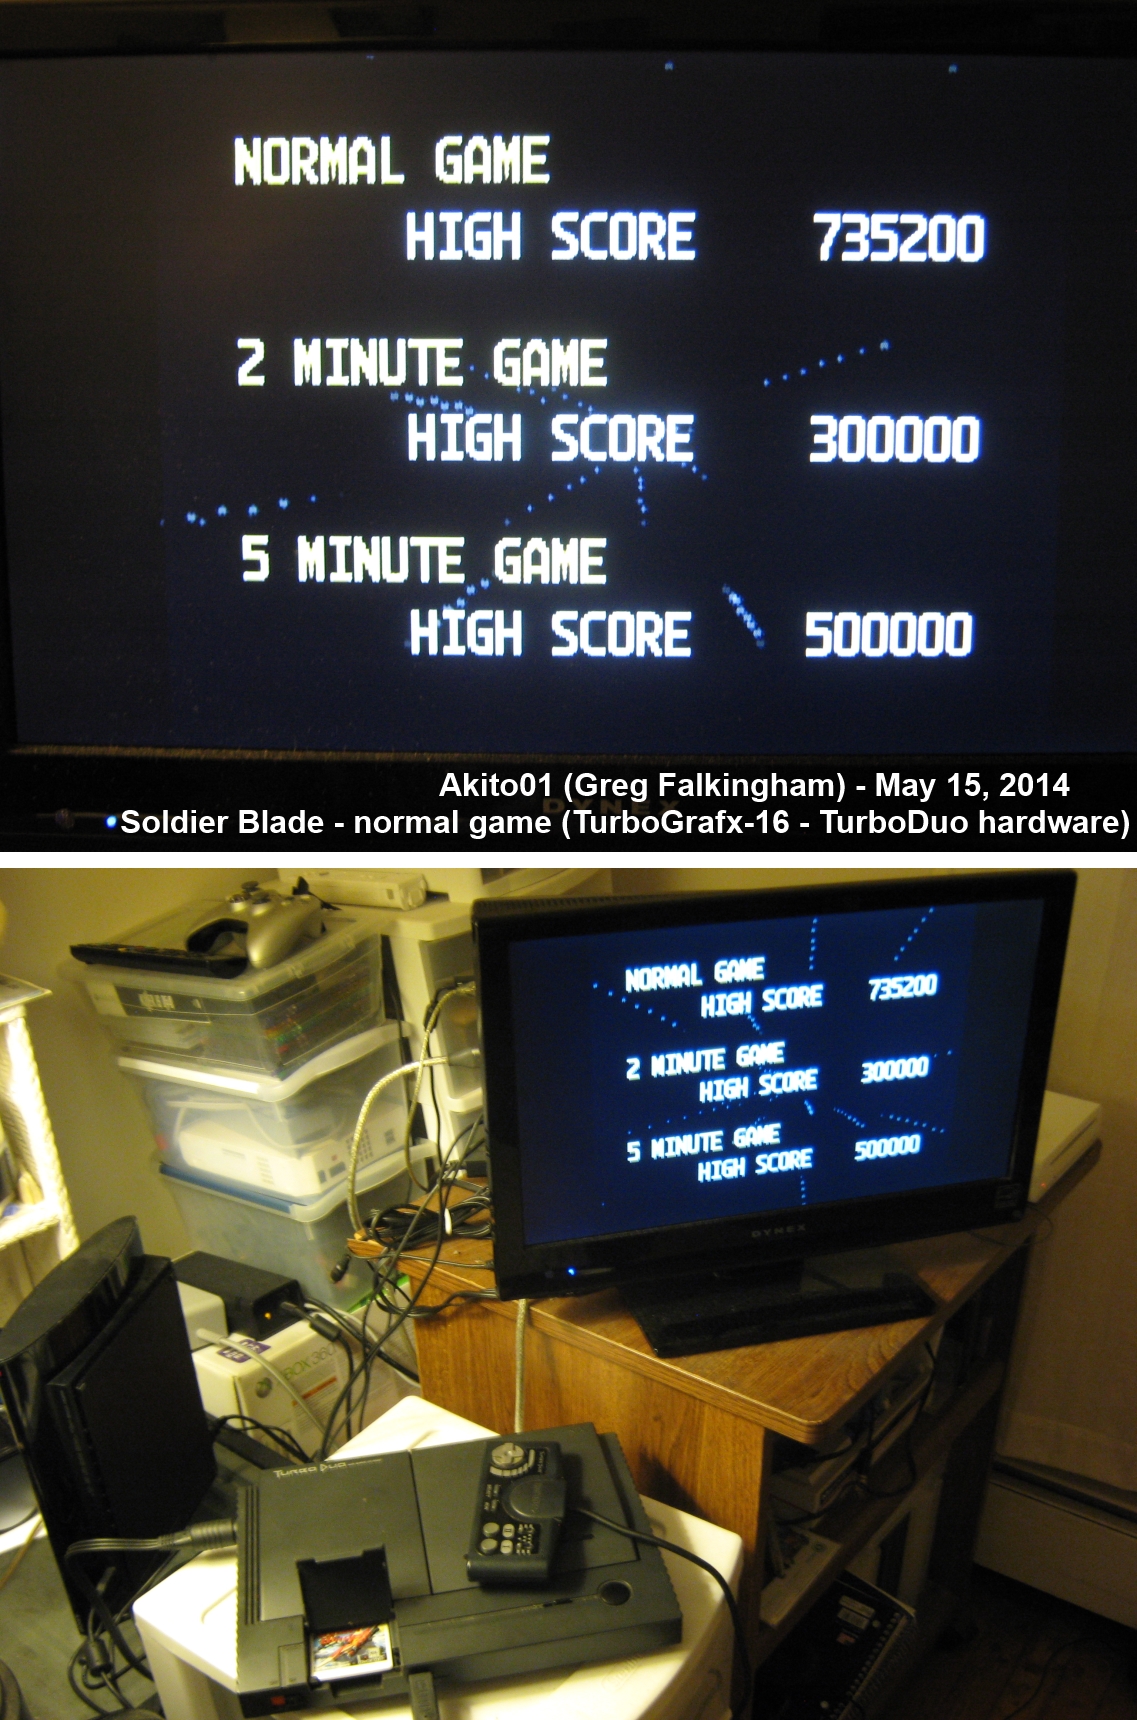 Akito01: Soldier Blade (TurboGrafx-16/PC Engine) 735,200 points on 2014-05-16 13:46:49